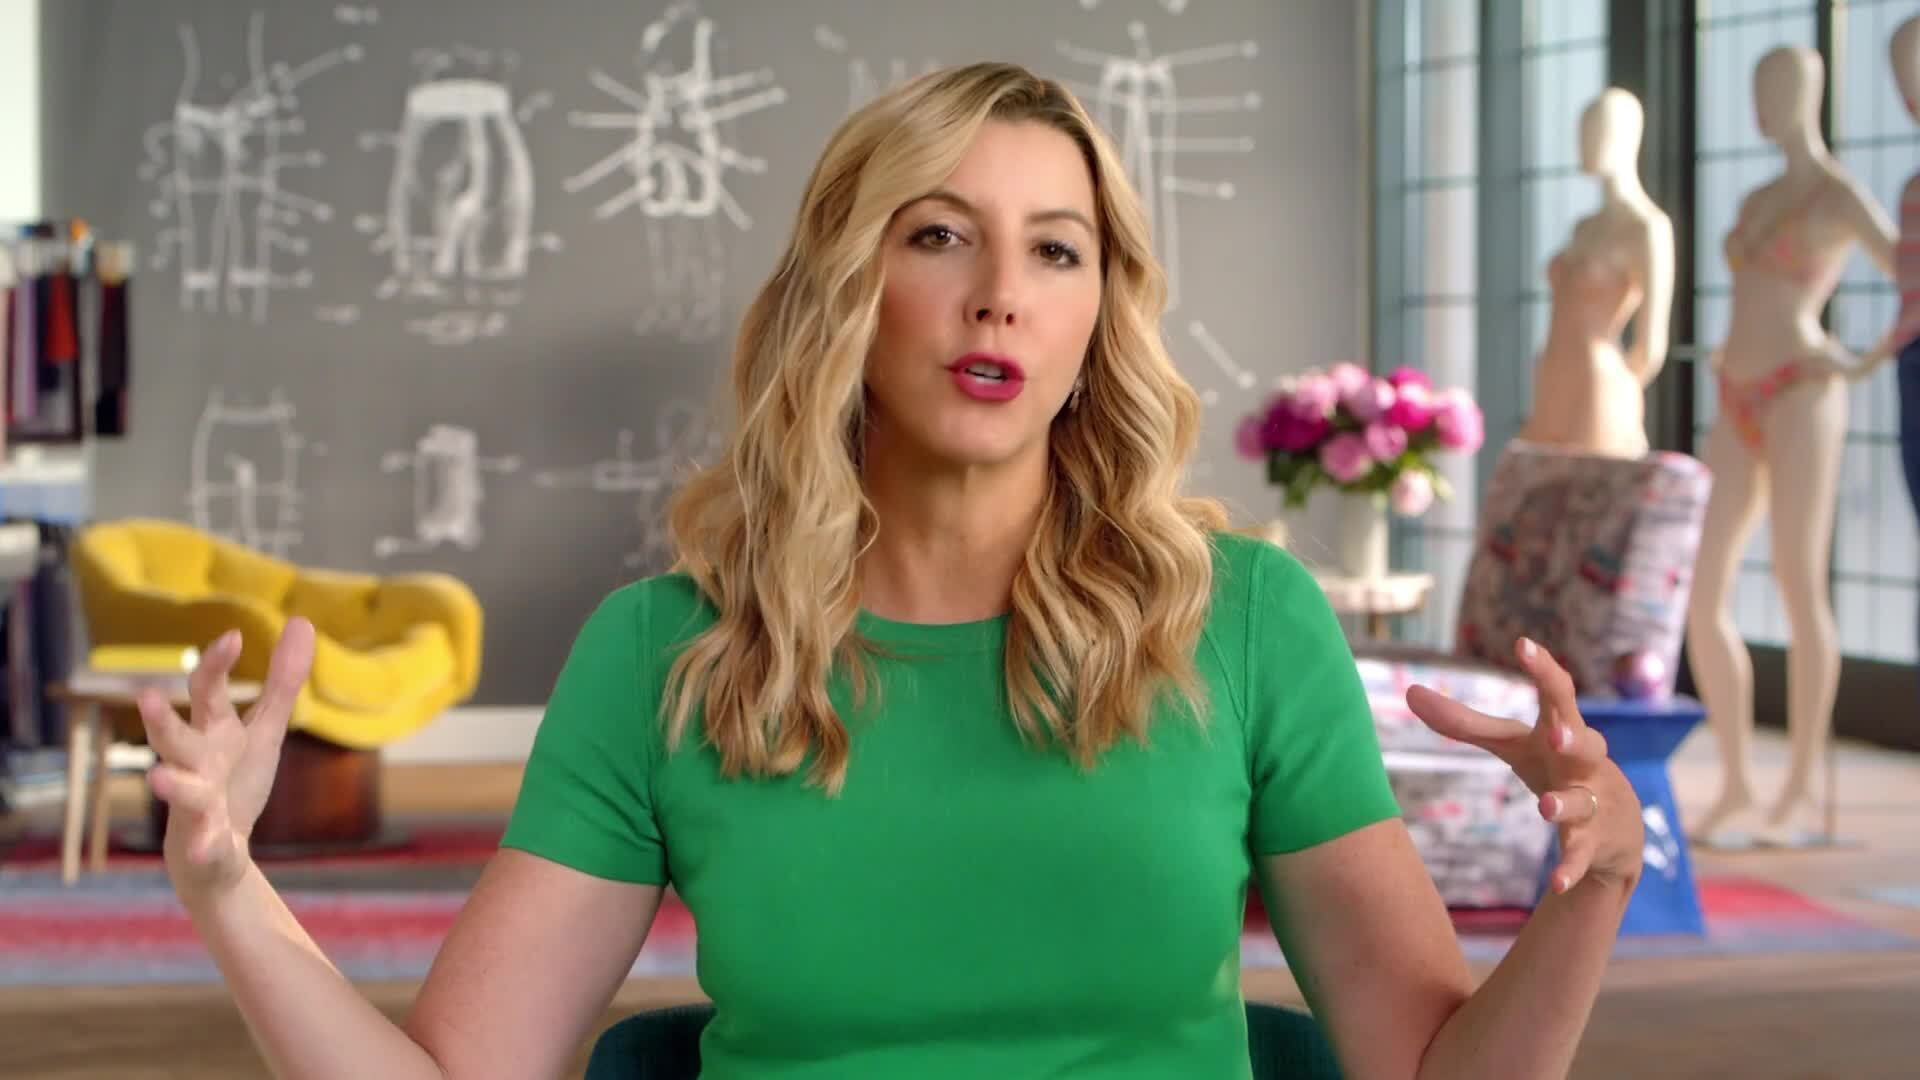 Meet Sara Blakely, the youngest millionaire who created her own fortune